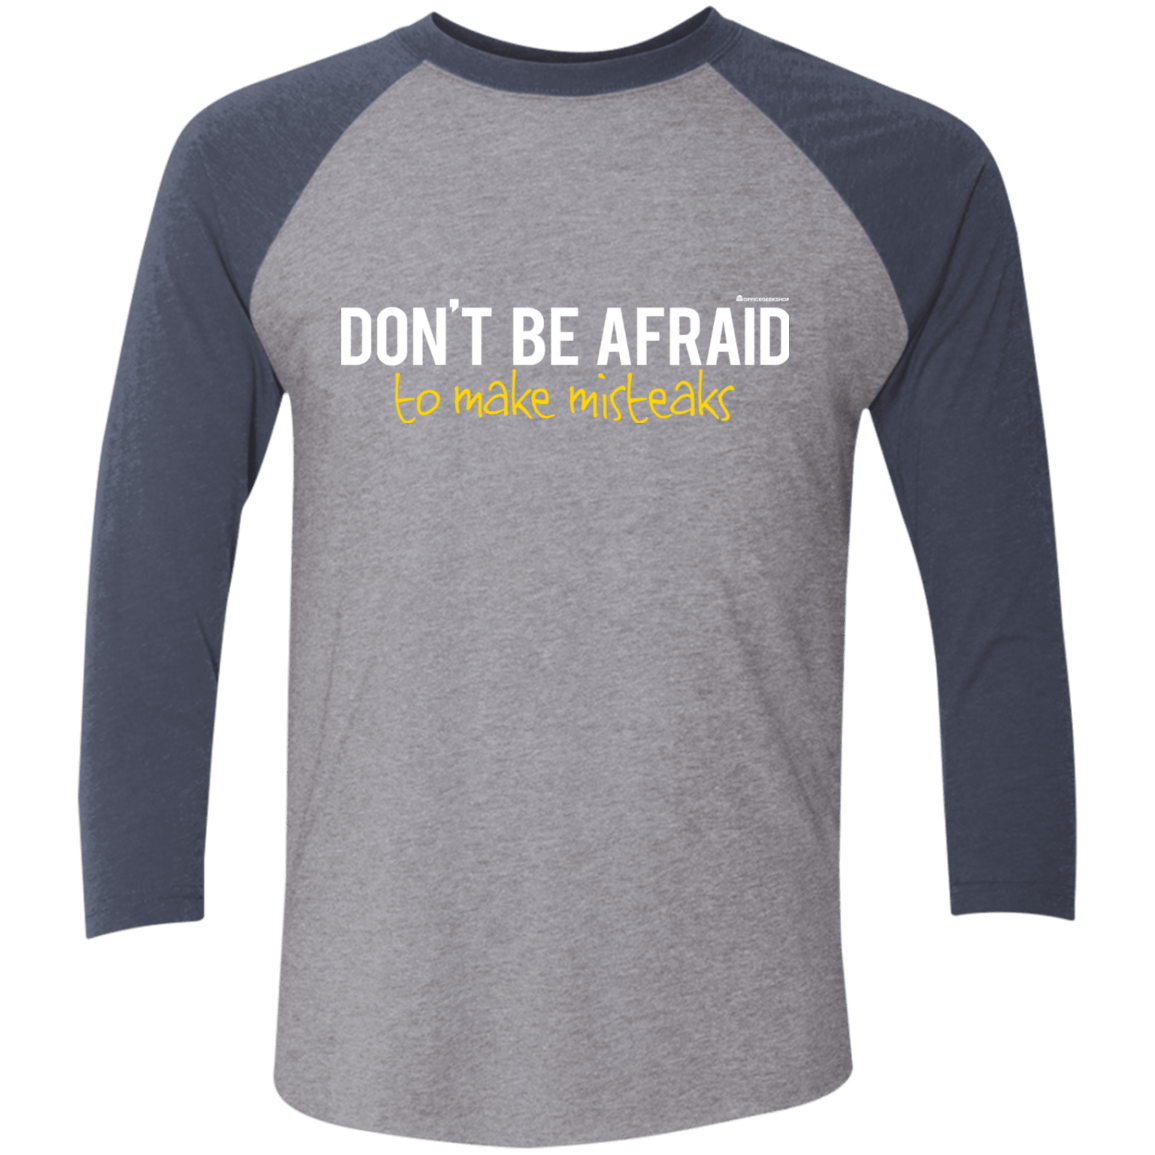 T-Shirts Premium Heather/Vintage Navy / X-Small Don_t Be Afraid To Make Misteaks Men's Triblend 3/4 Sleeve